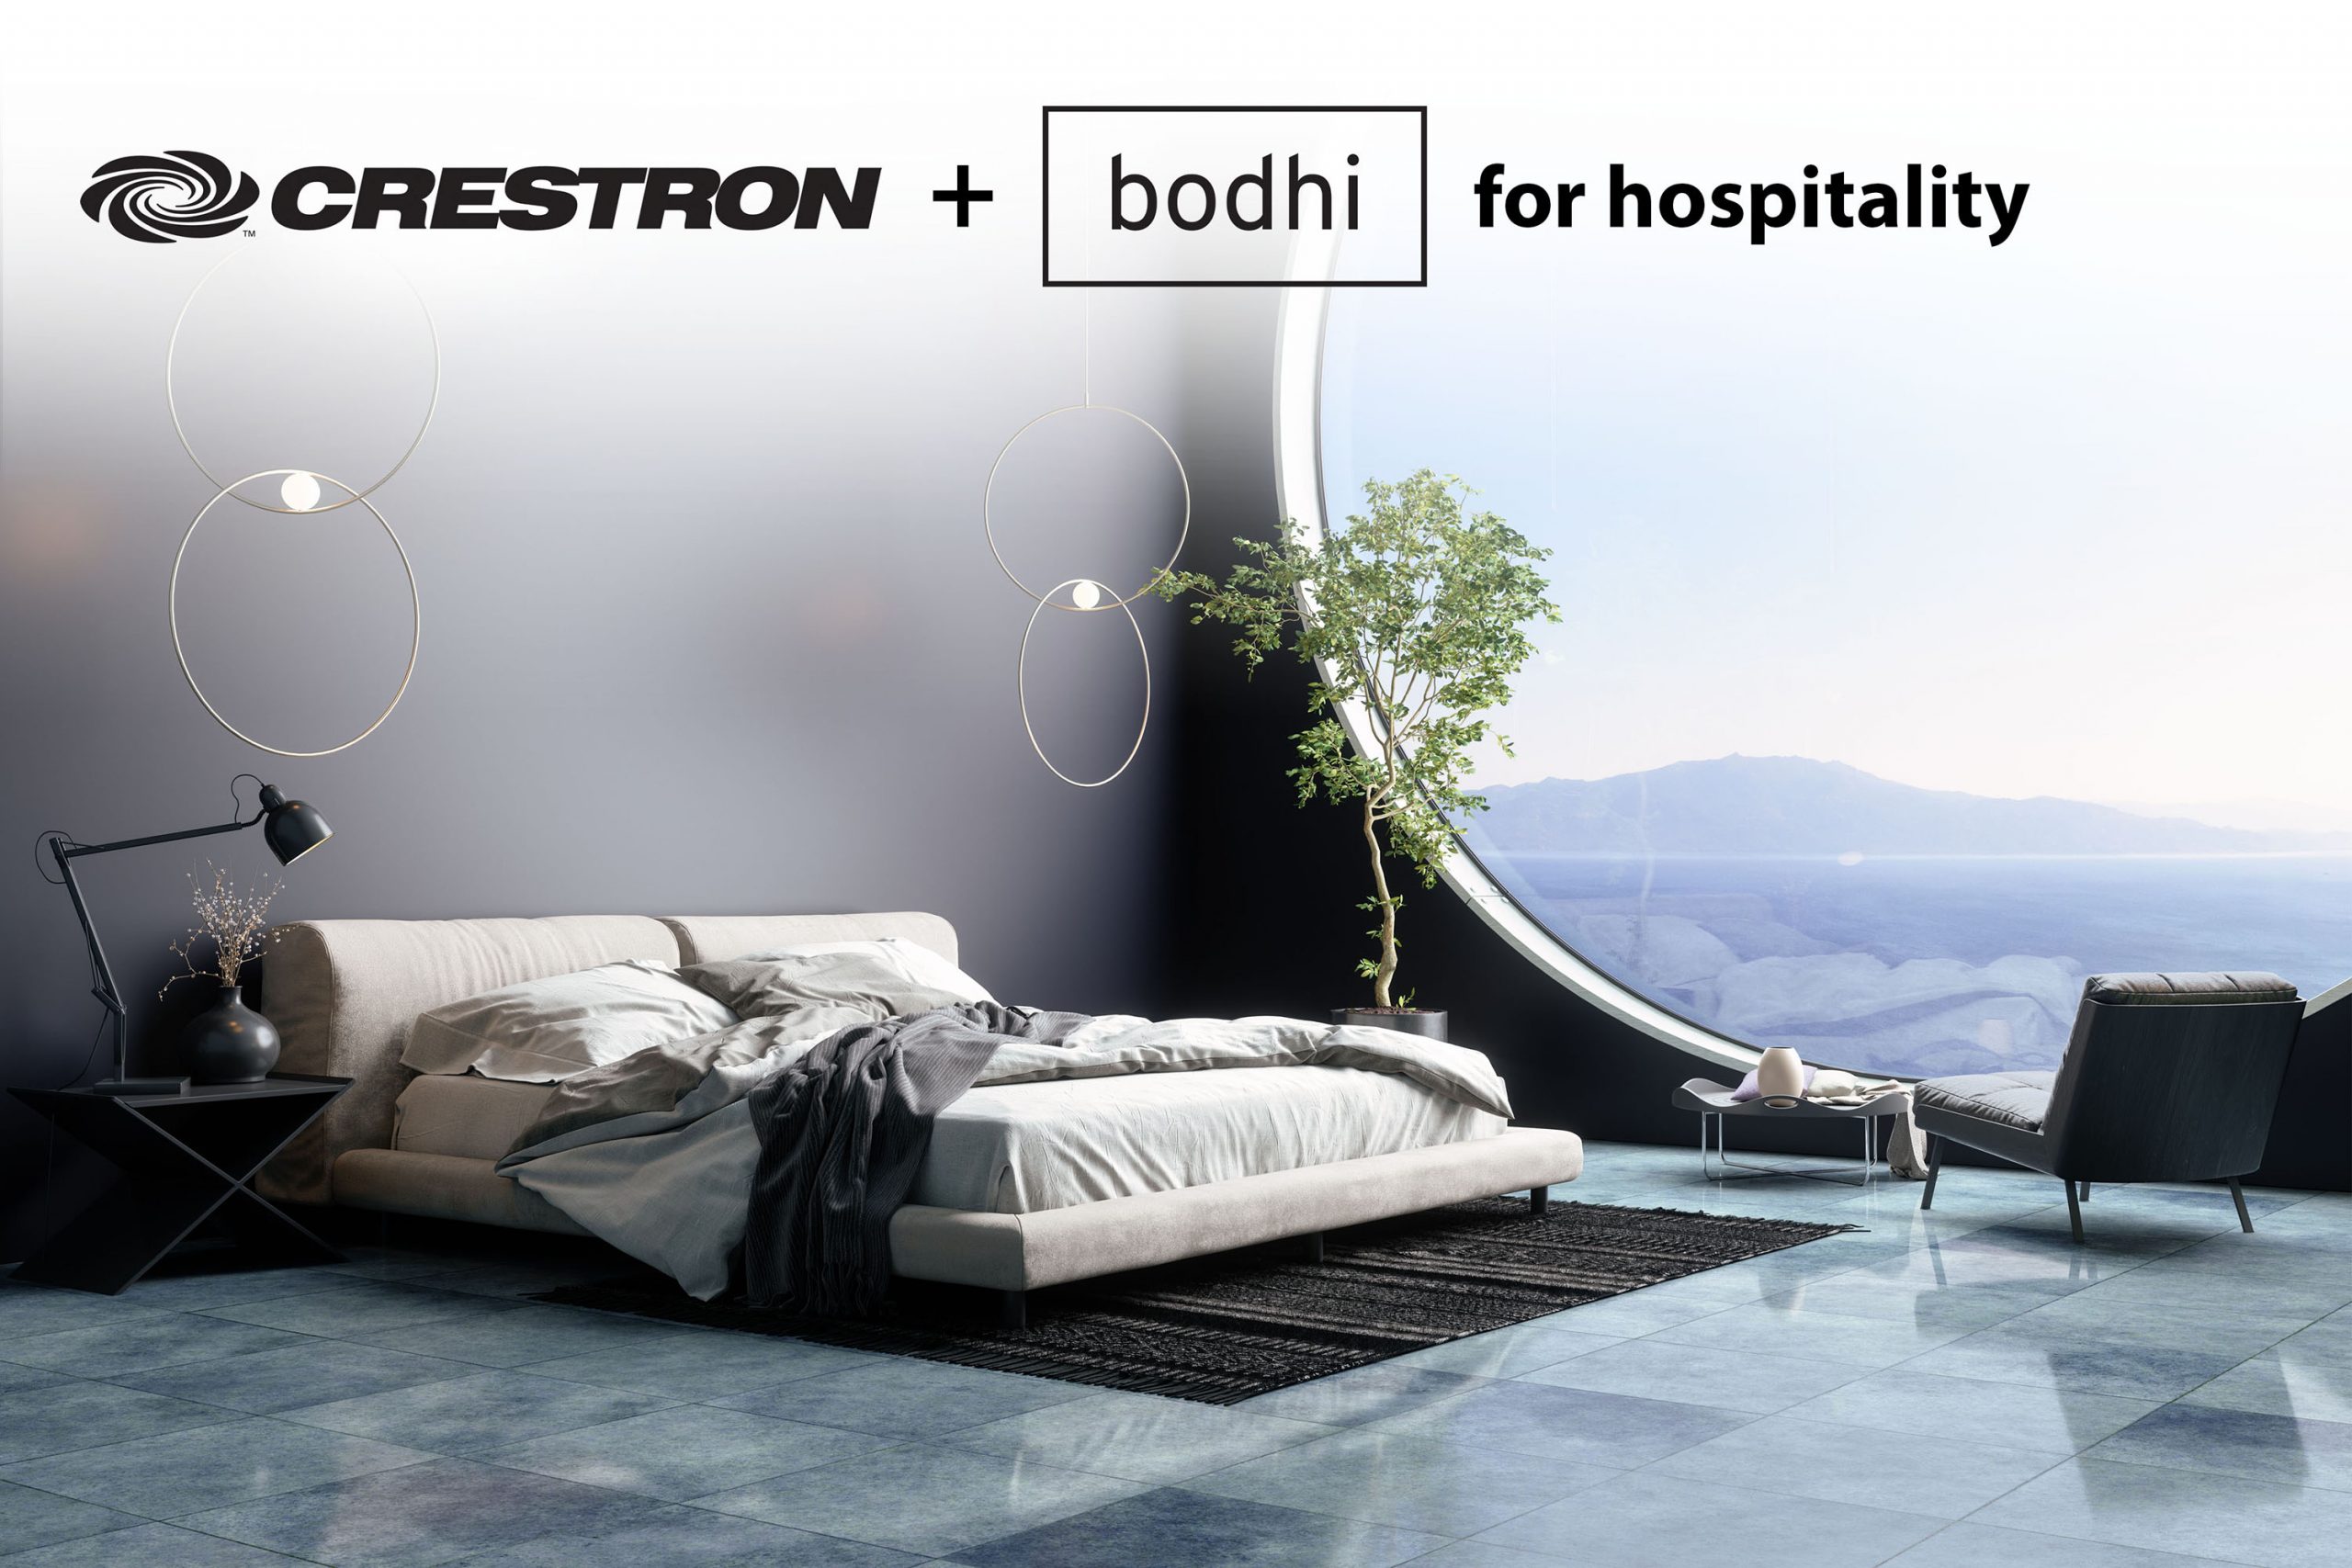 Crestron is showing Bodhi as a crucial part of its hospitality solution, because Bodhi significantly enhances Crestron’s offerings in guestrooms and the public areas of hotels and resorts.